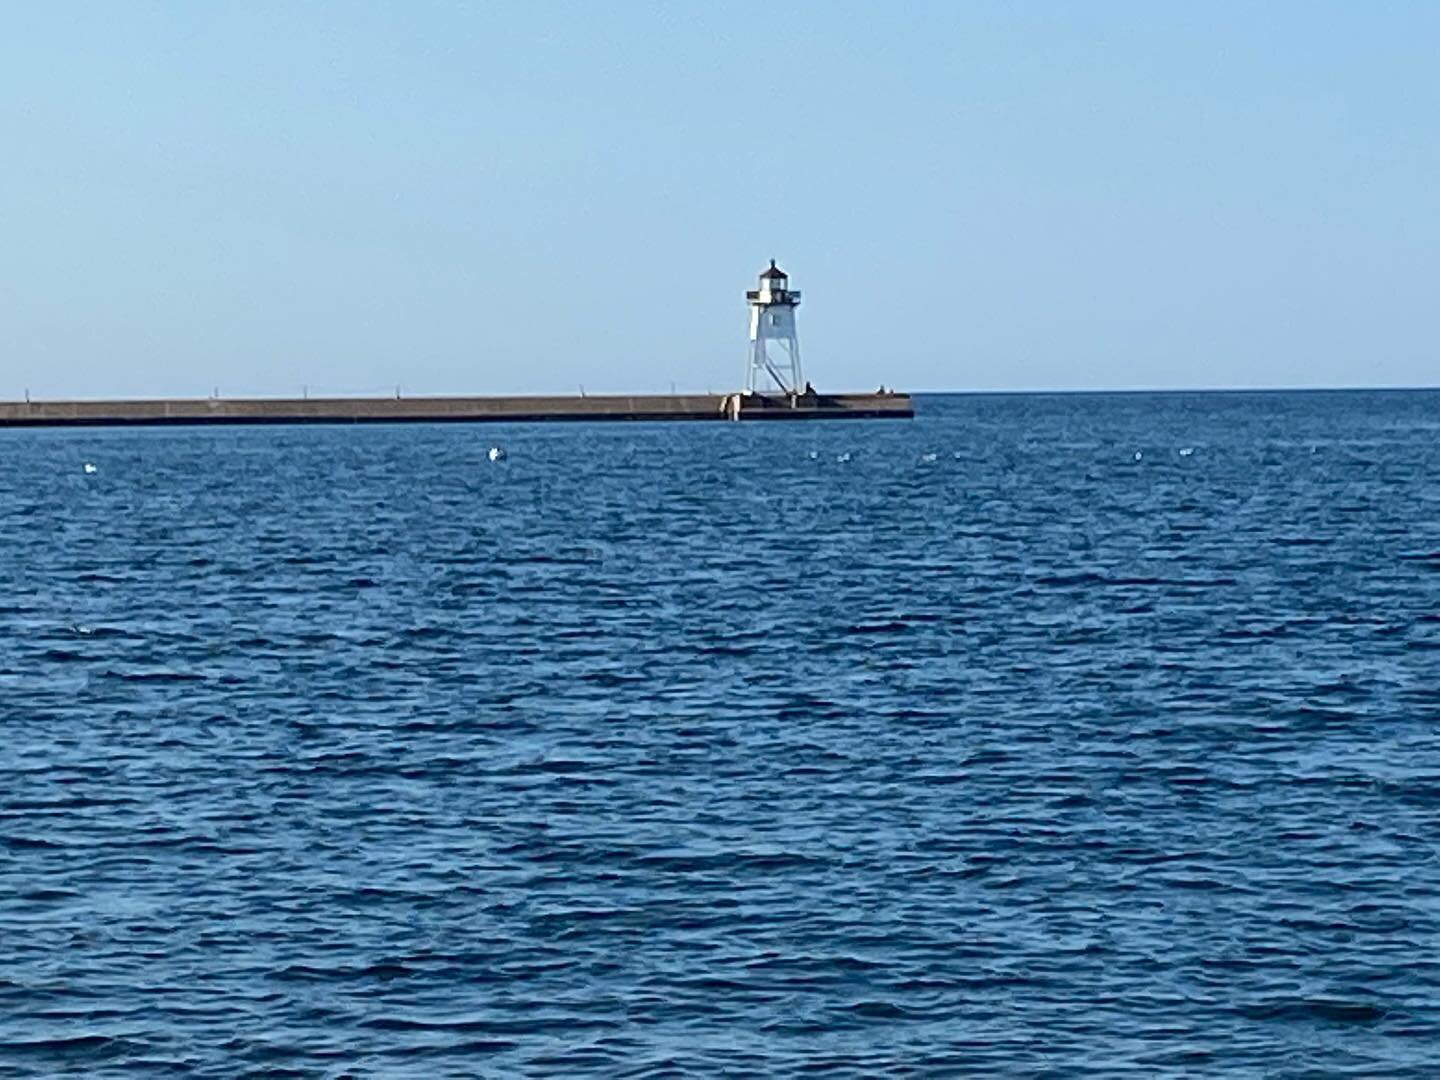 Harbor Watch: the light house also watches over the years and decades of the harbor. It also shines light in dark times.